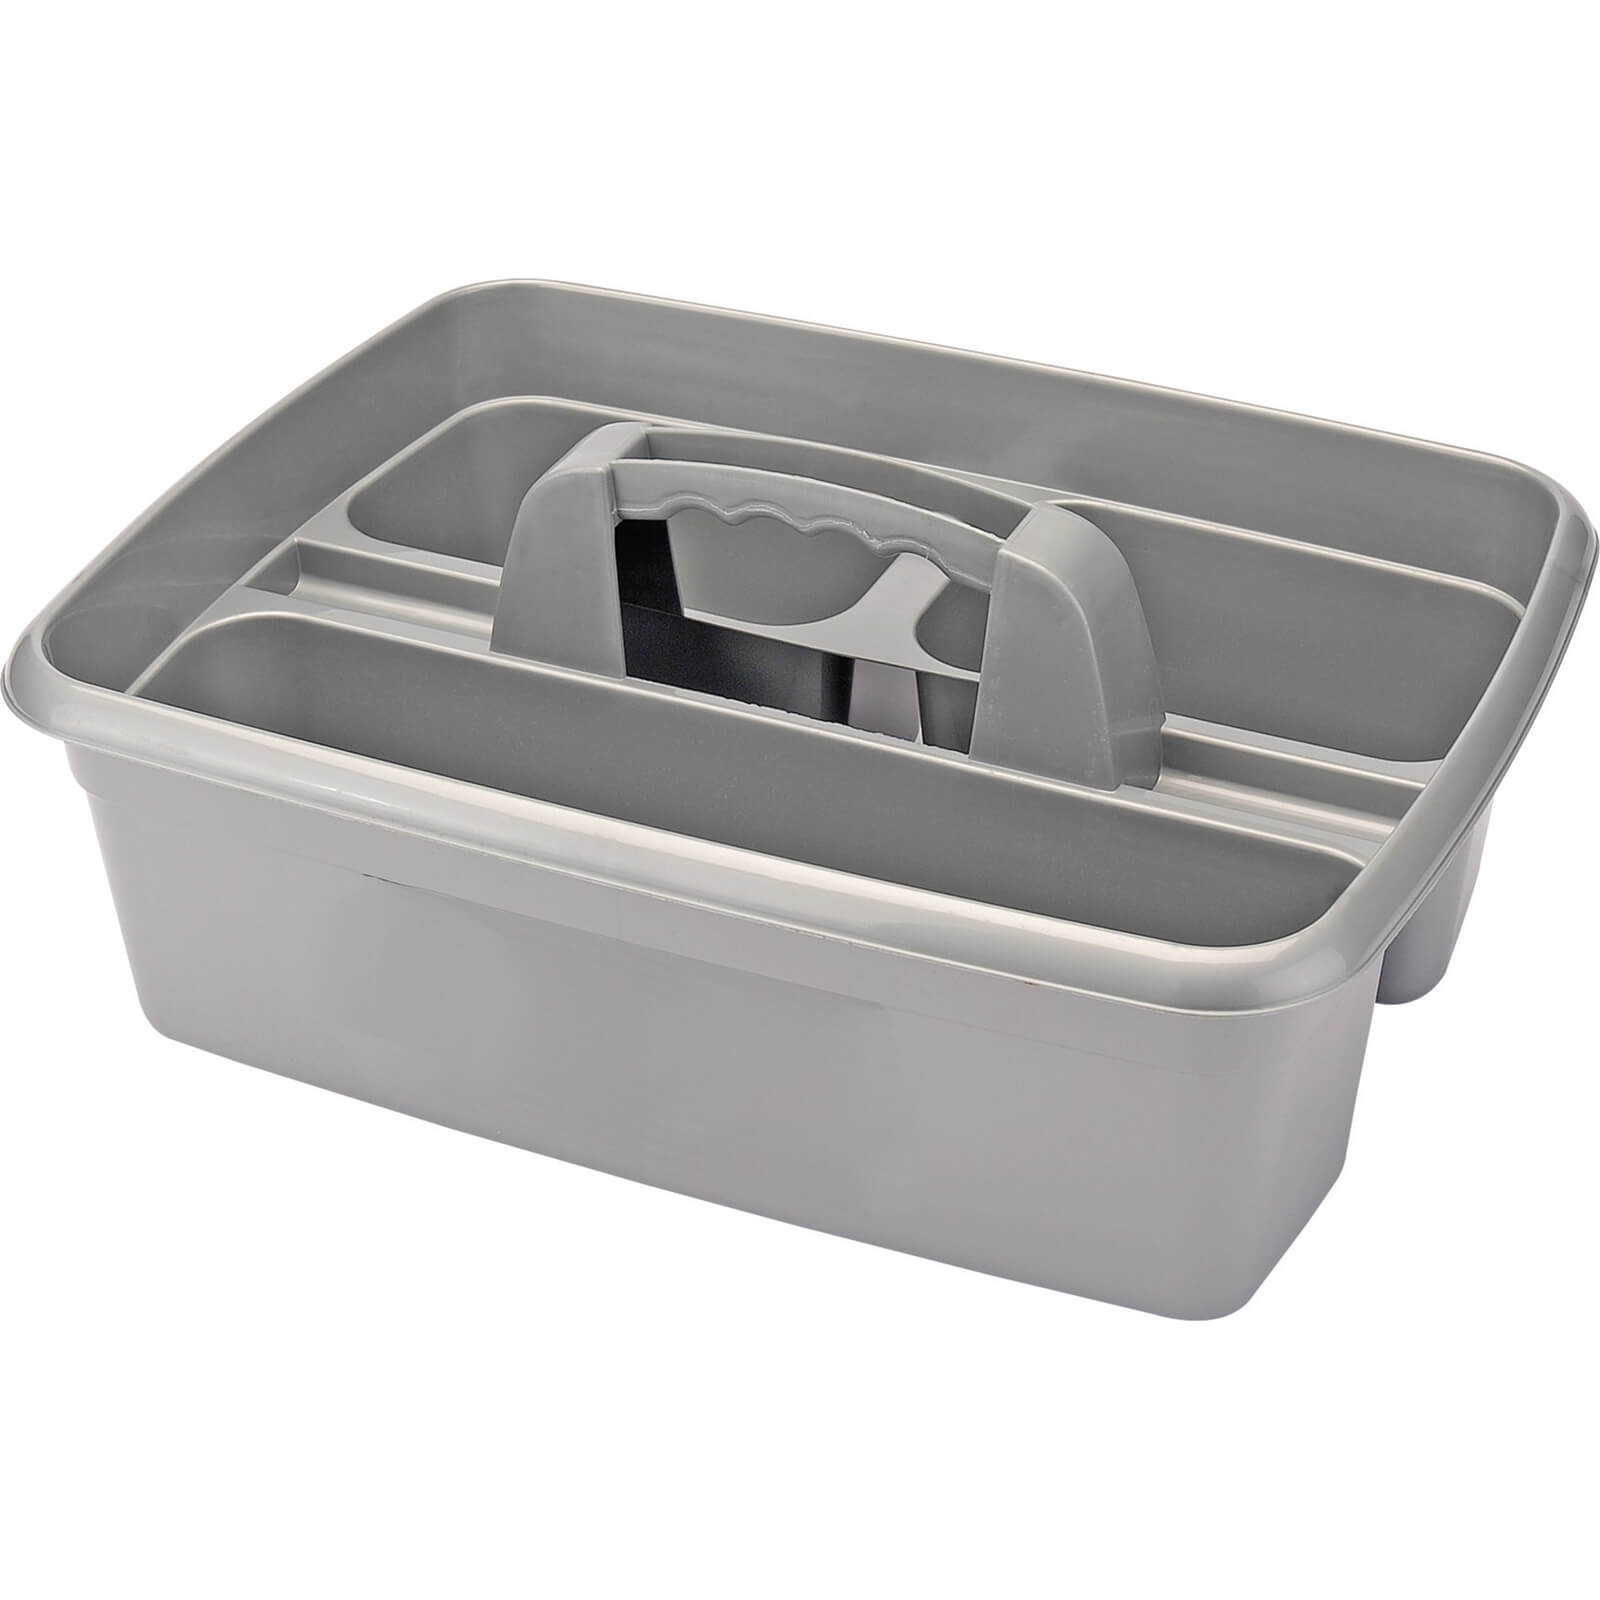 Image of Draper 3 Compartment Cleaning Caddy / Tote Tray